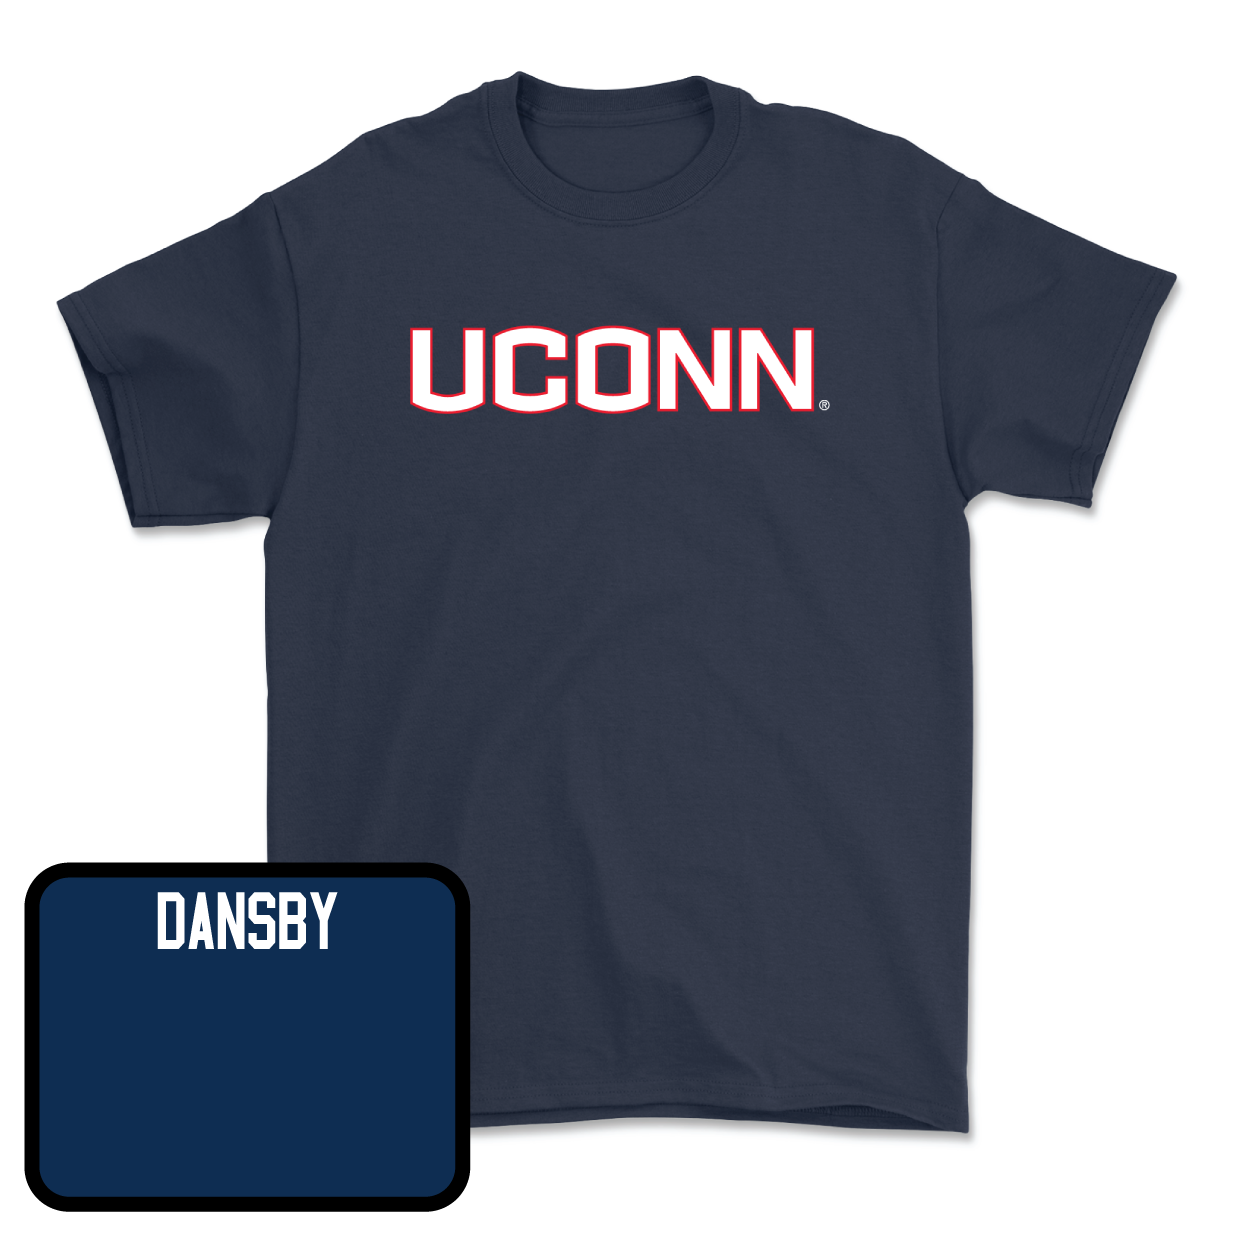 Navy Women's Track & Field UConn Tee X-Large / Mia Dansby